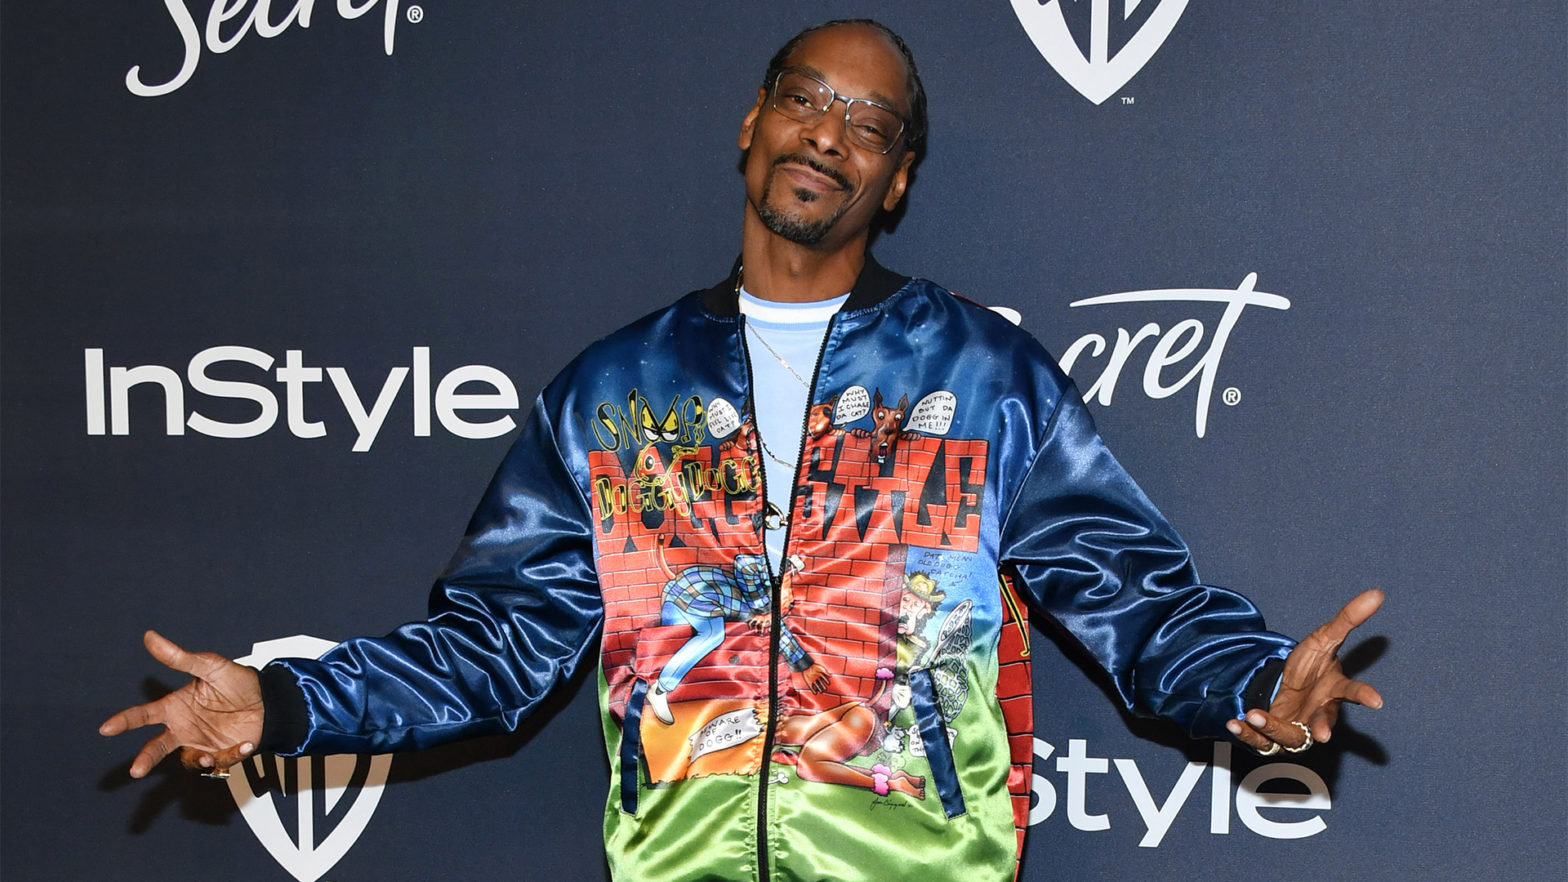 Doggyland: Snoop Dogg Takes His Talents To YouTube To Educate Kids With A New 3D Animated Series